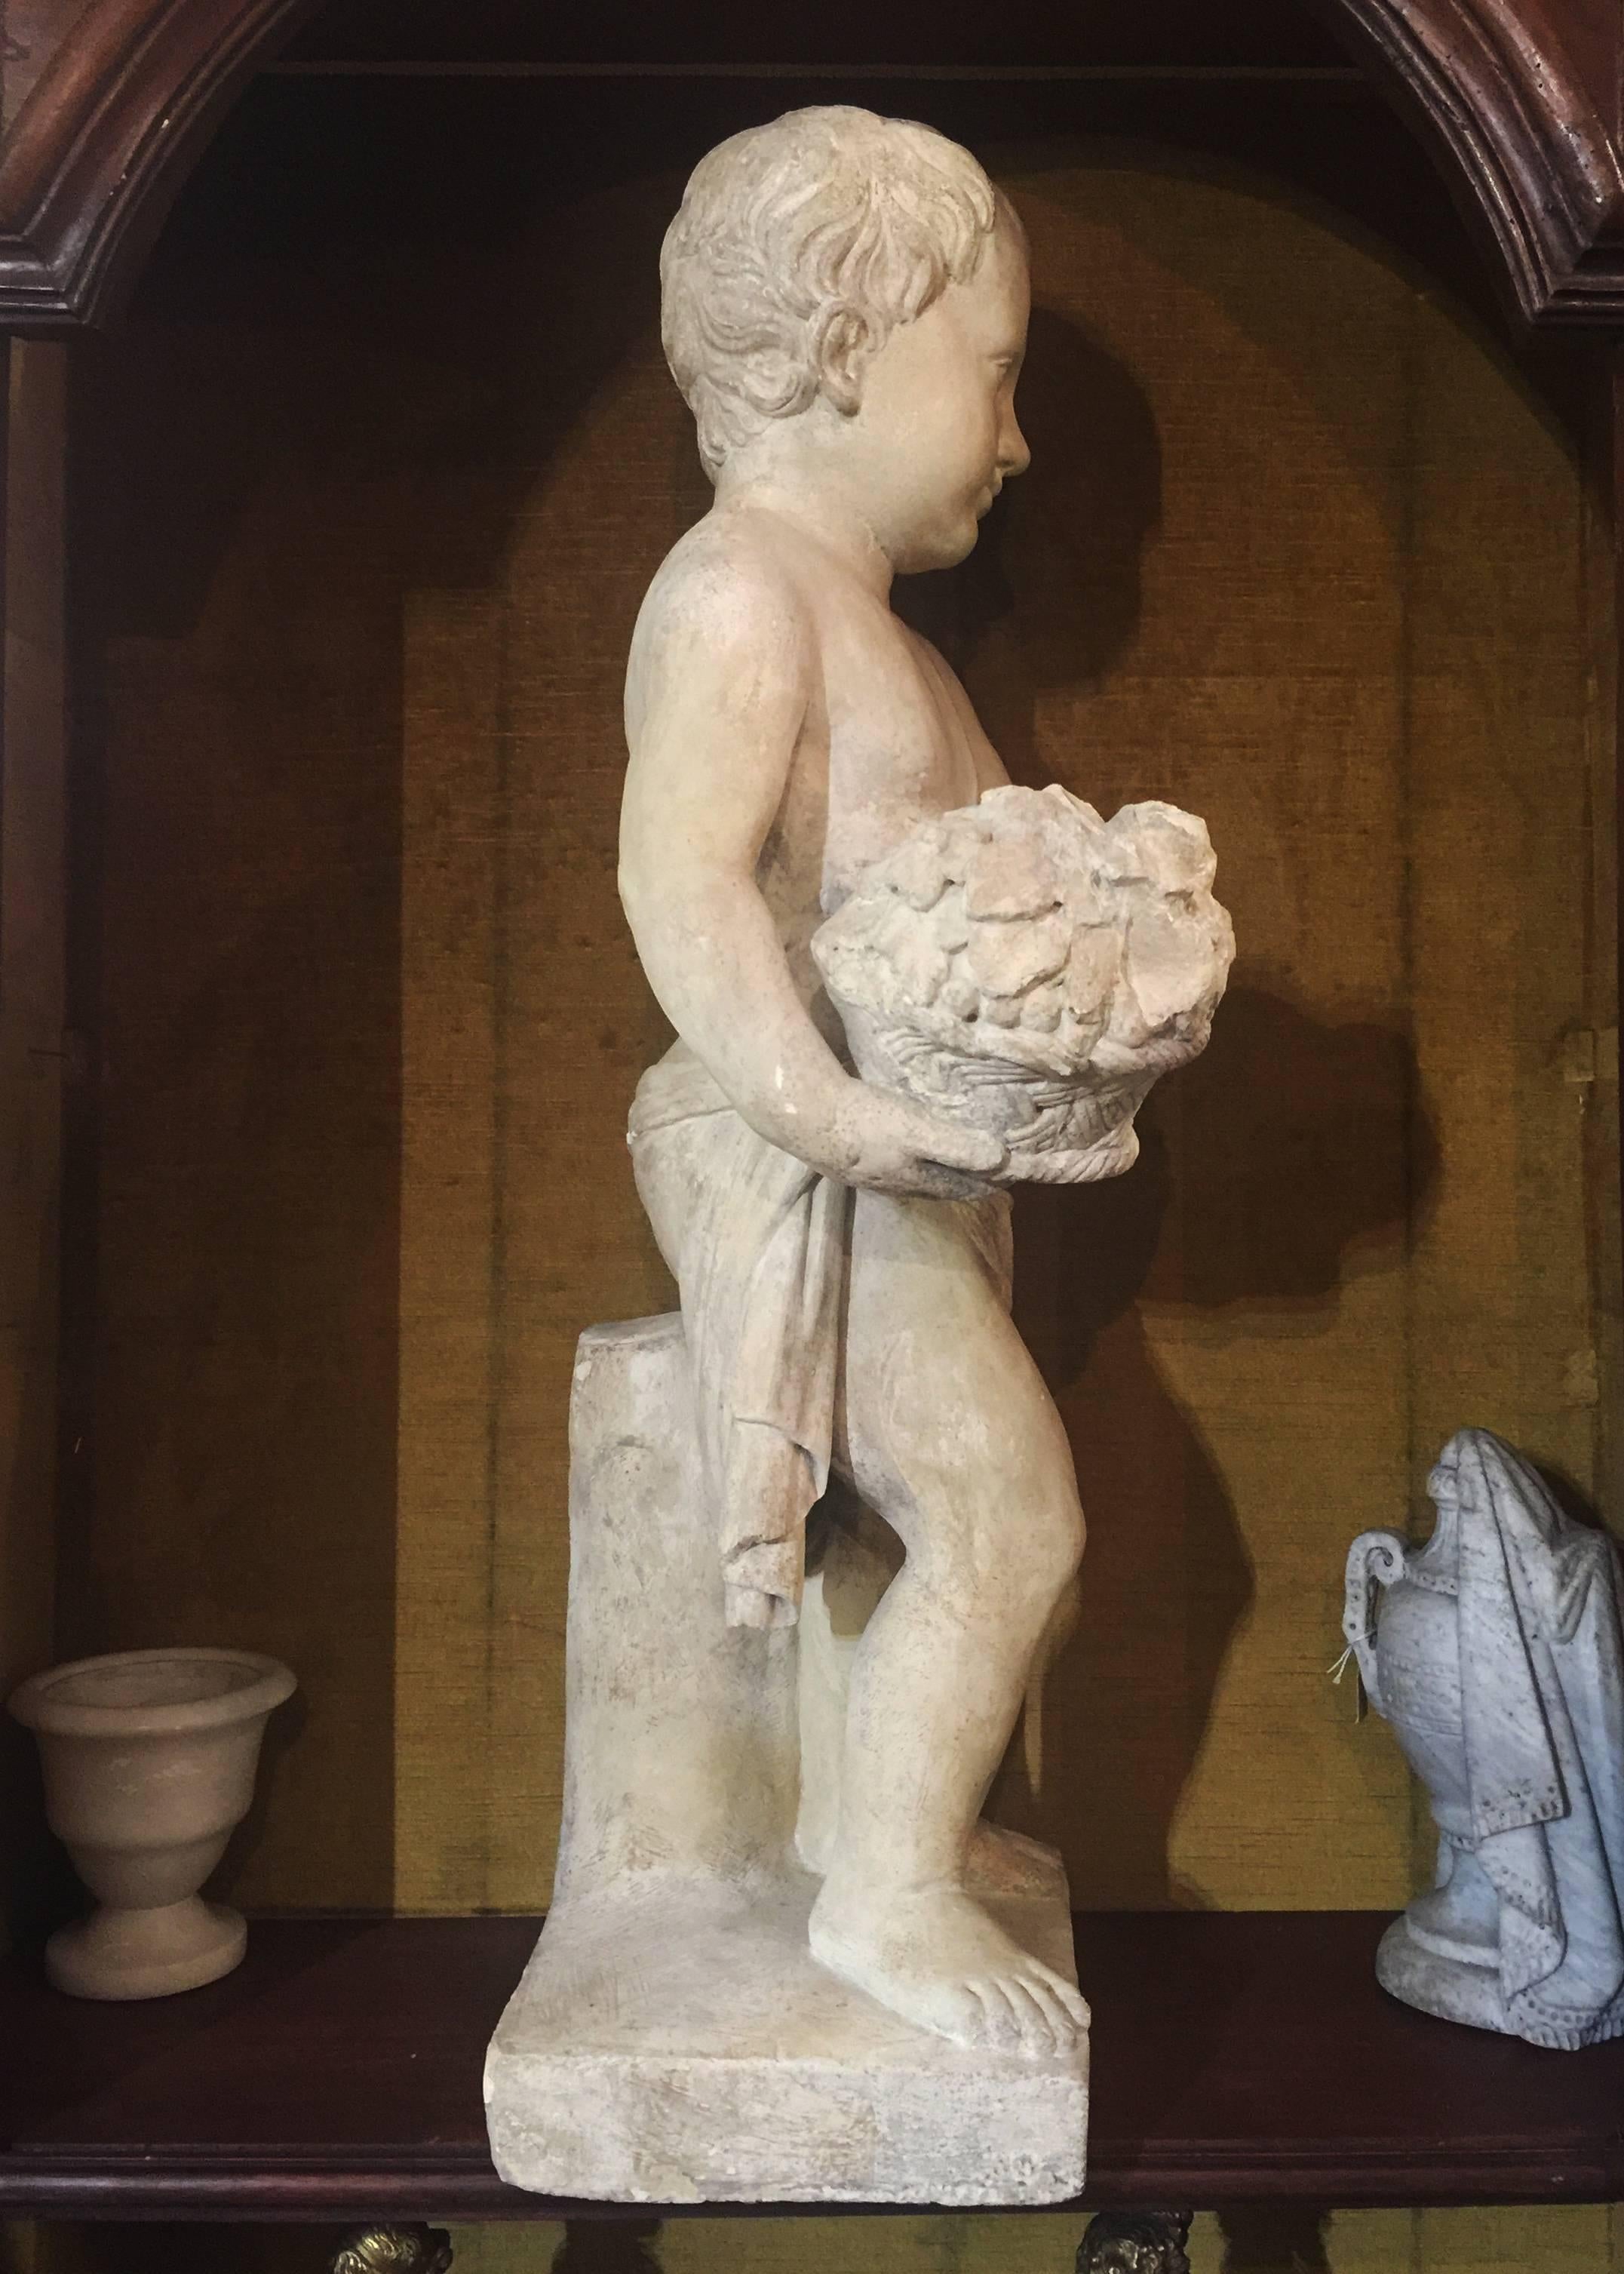 A charming stone statue depicting a small putto holding a basket with flowers.
Italian manufactory from the early 19th century
The sculpture has been cleaned and presents a protective patina.
It could be used as outdoor decoration in the garden